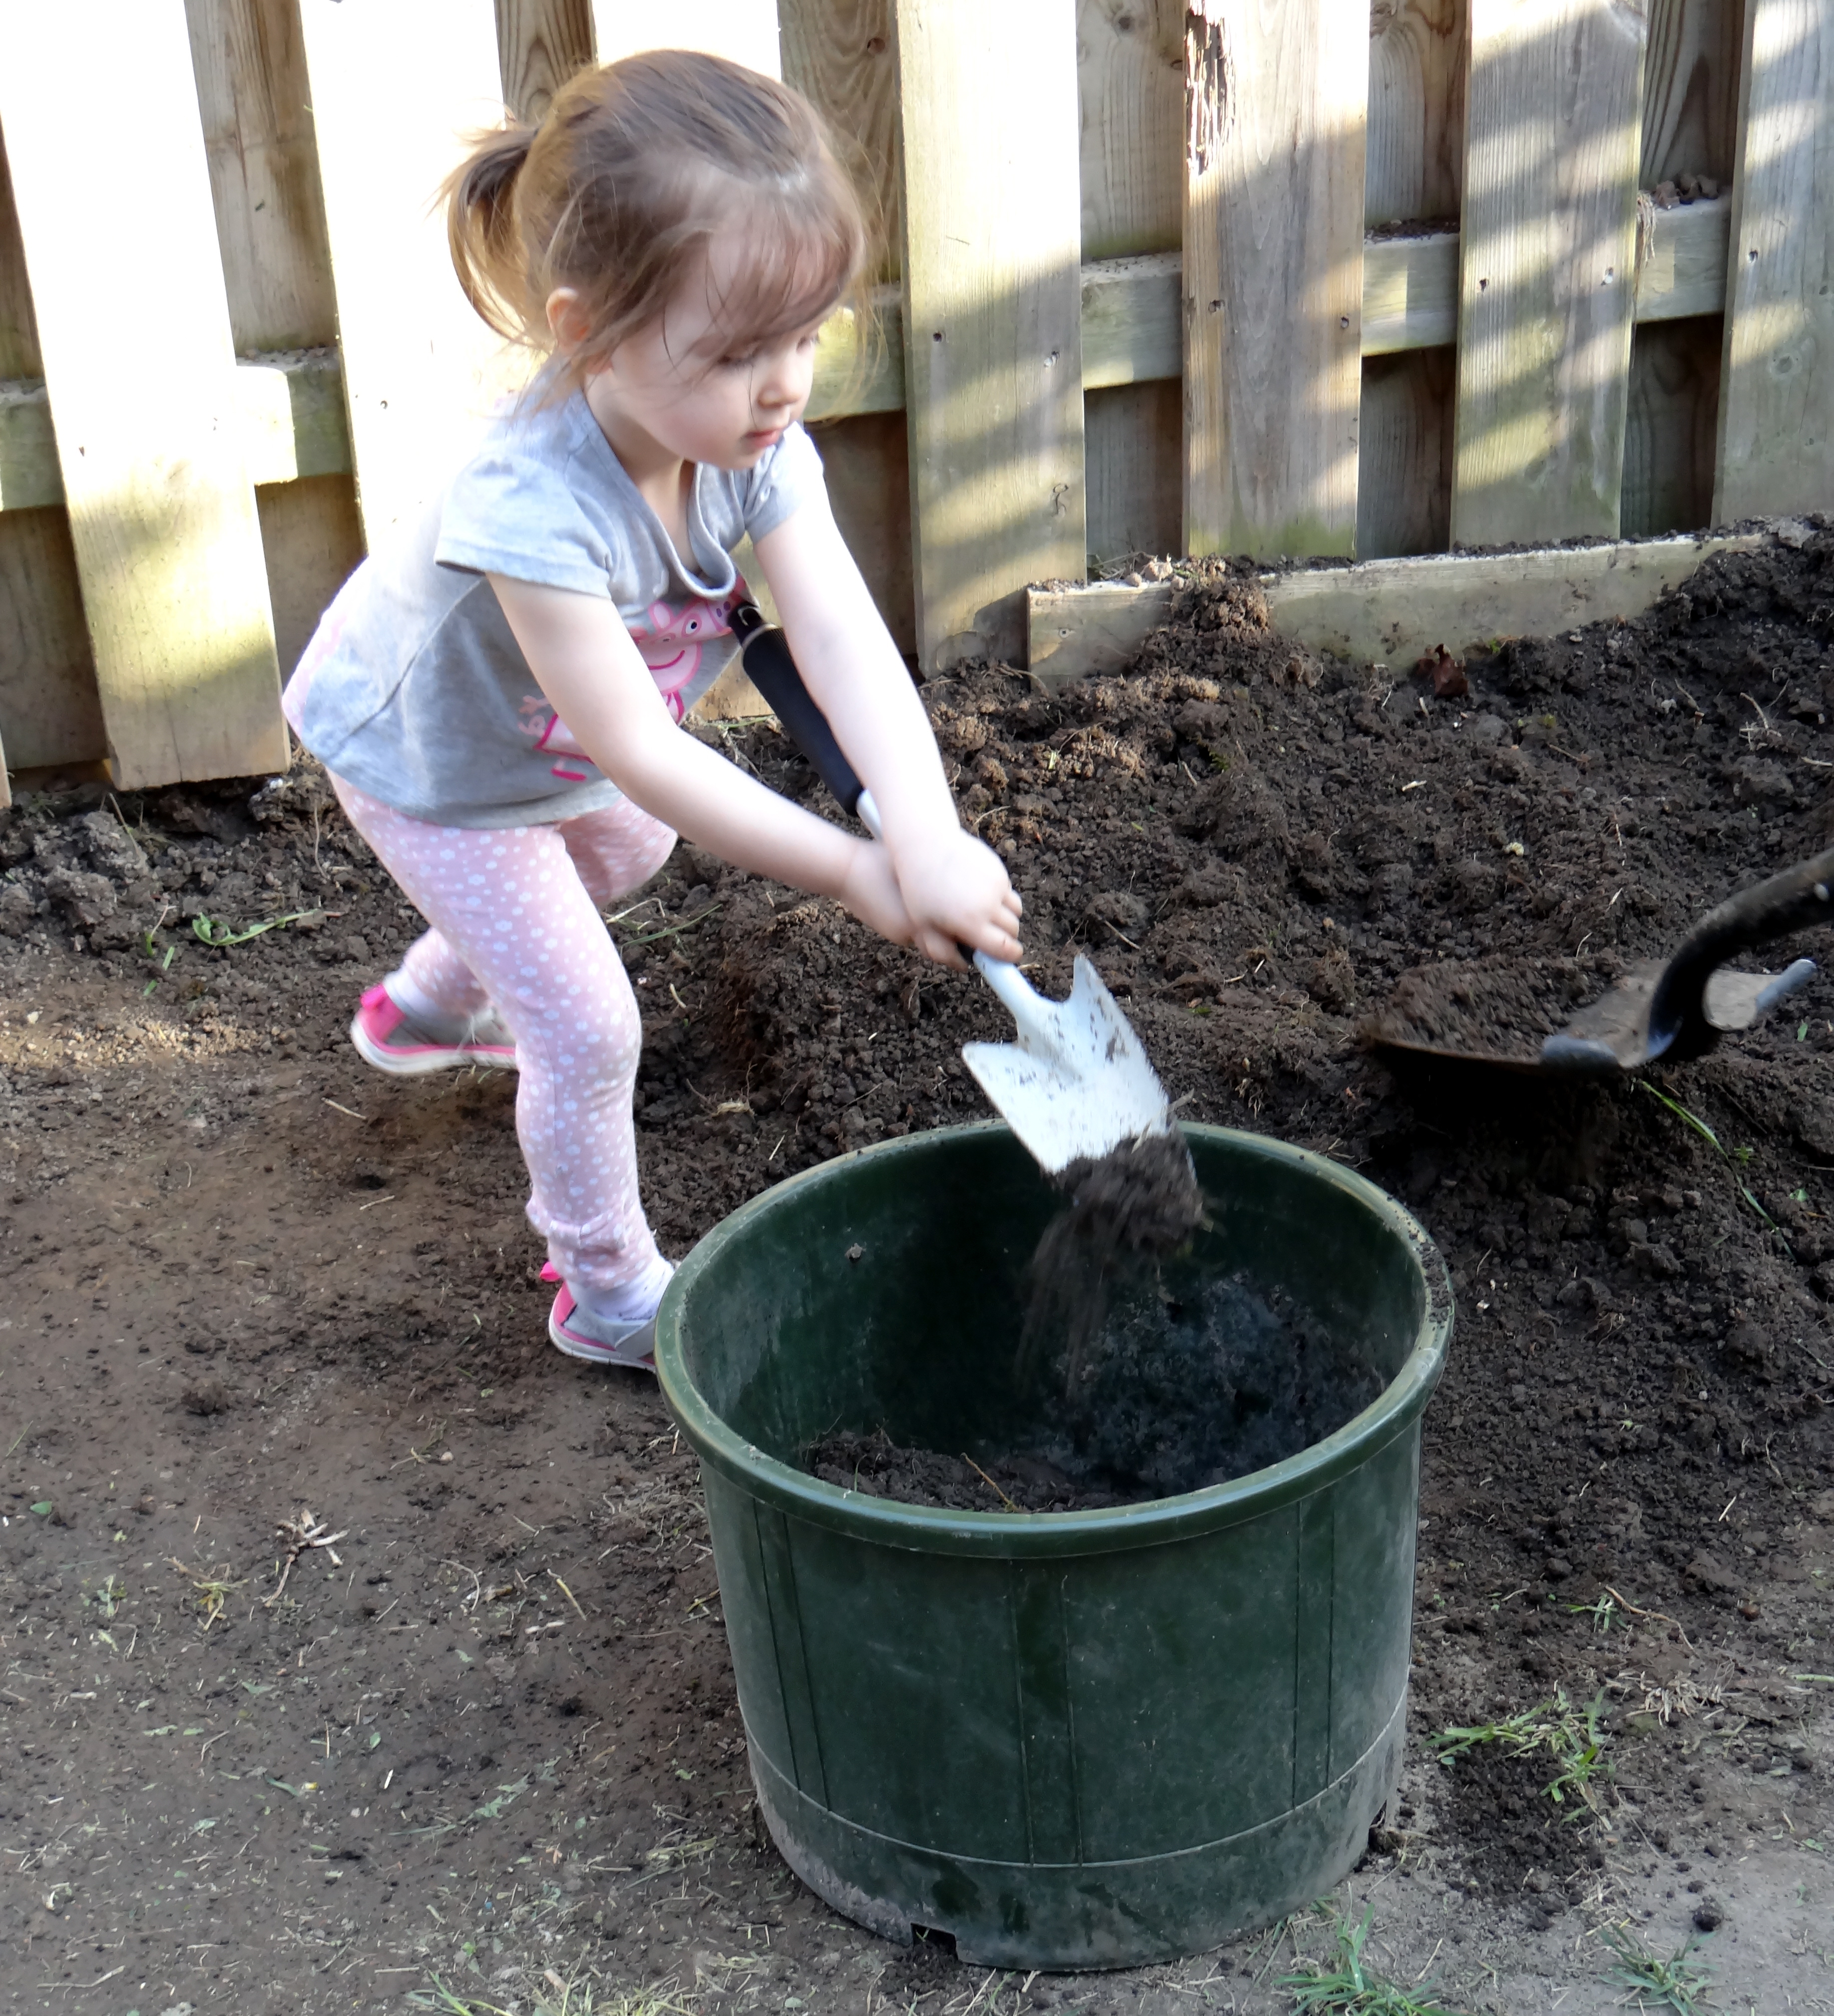 Toddler digging in the yard